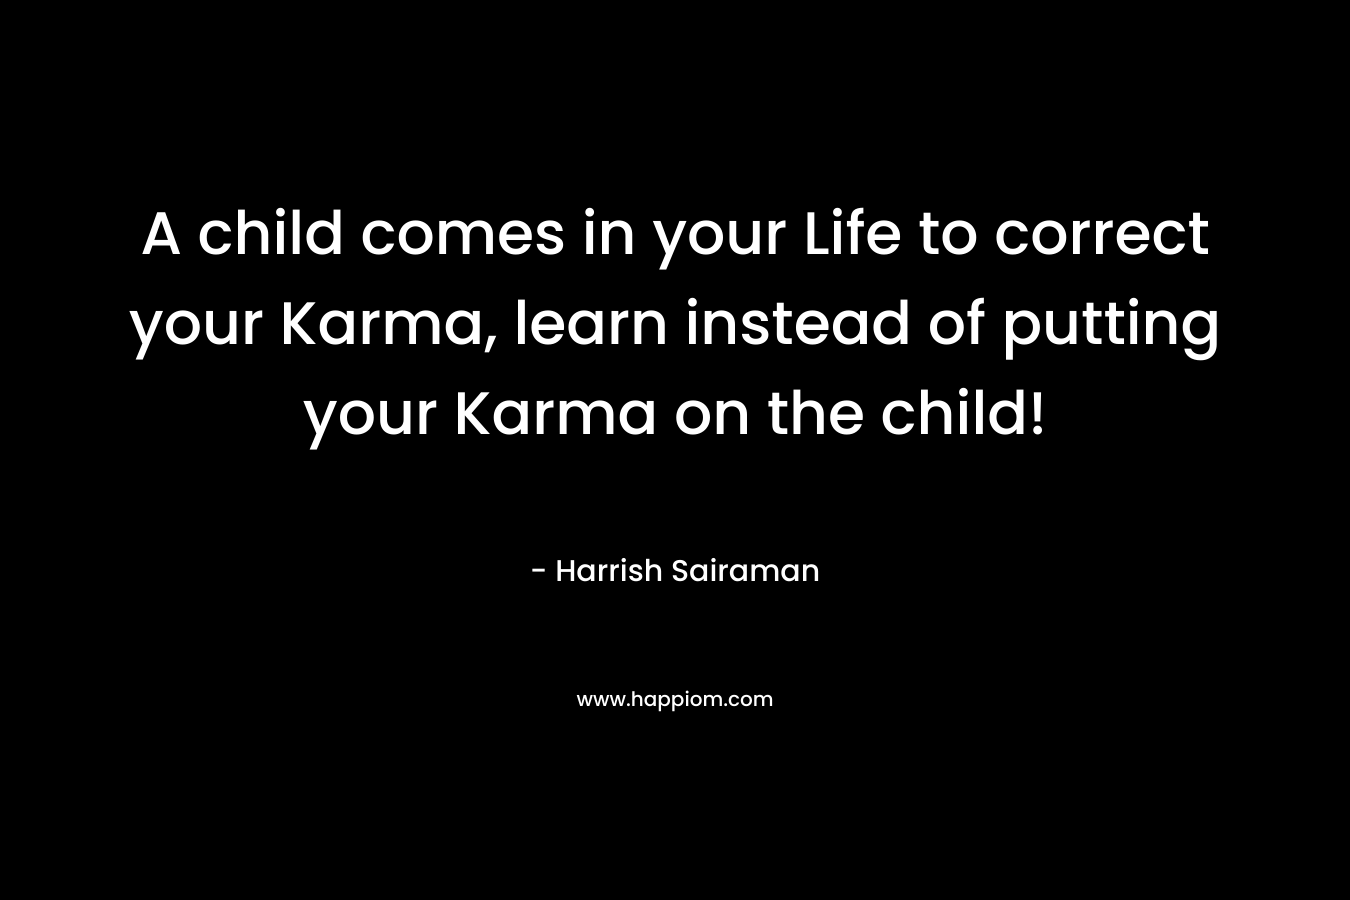 A child comes in your Life to correct your Karma, learn instead of putting your Karma on the child!